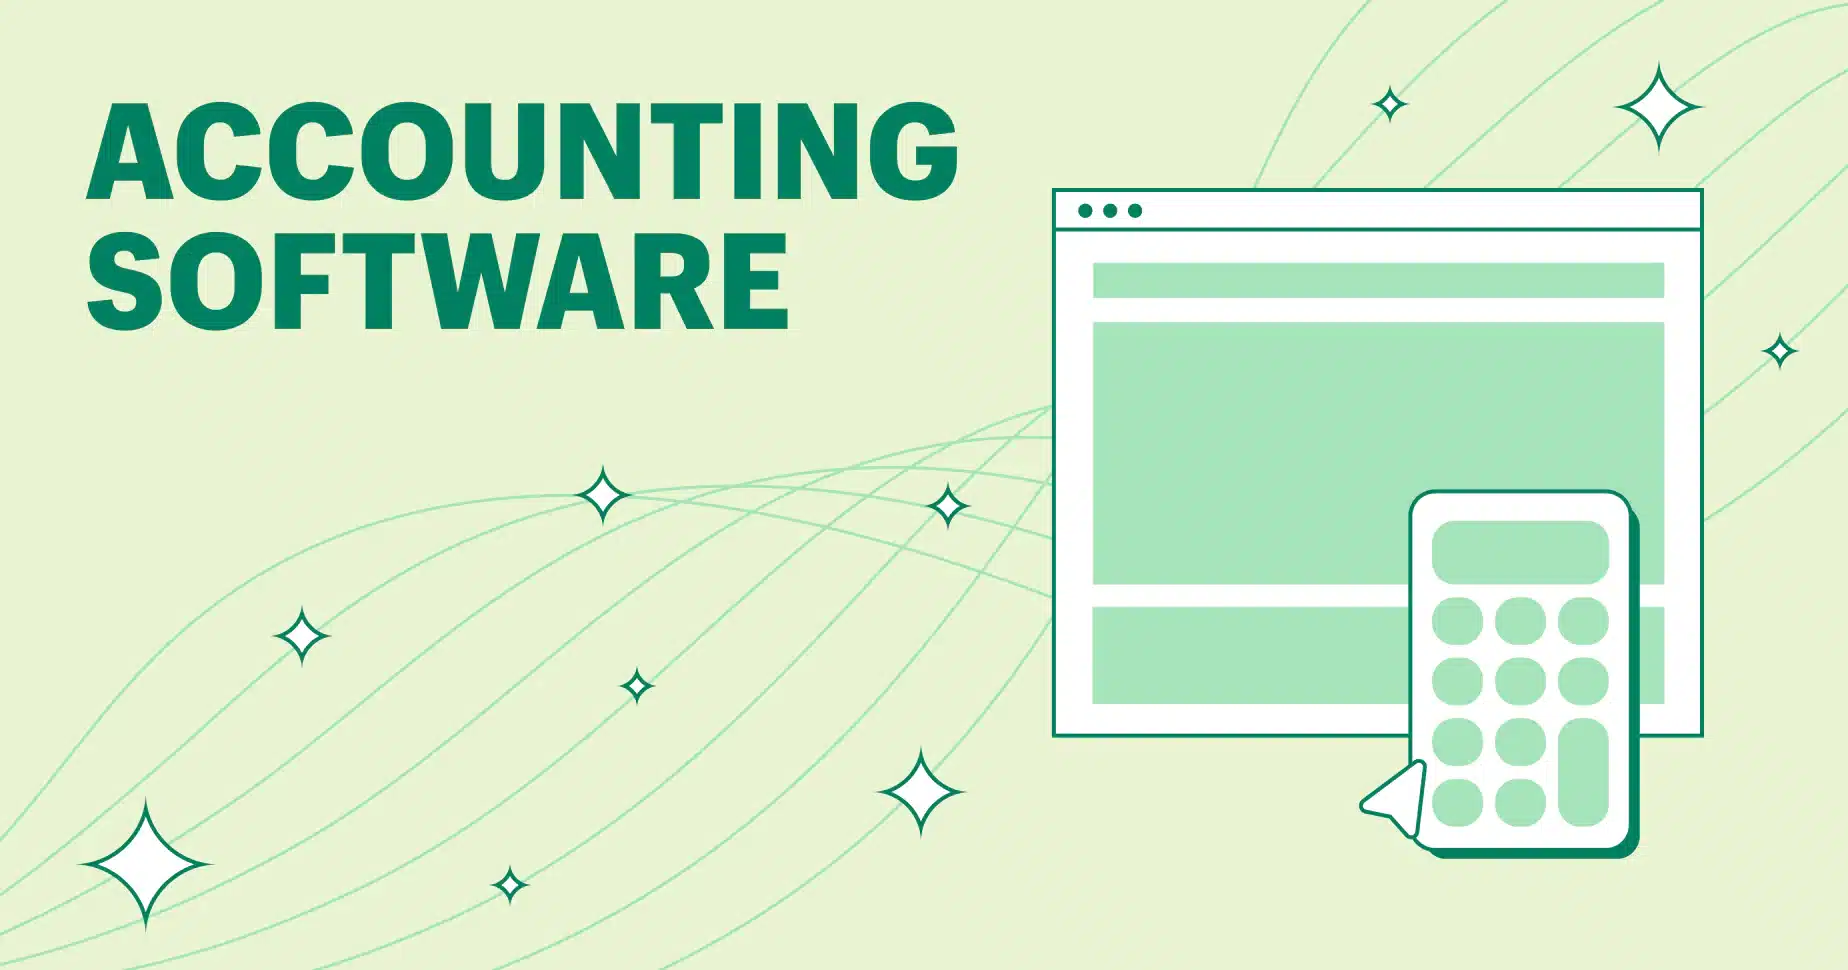 What software should an accountant have?